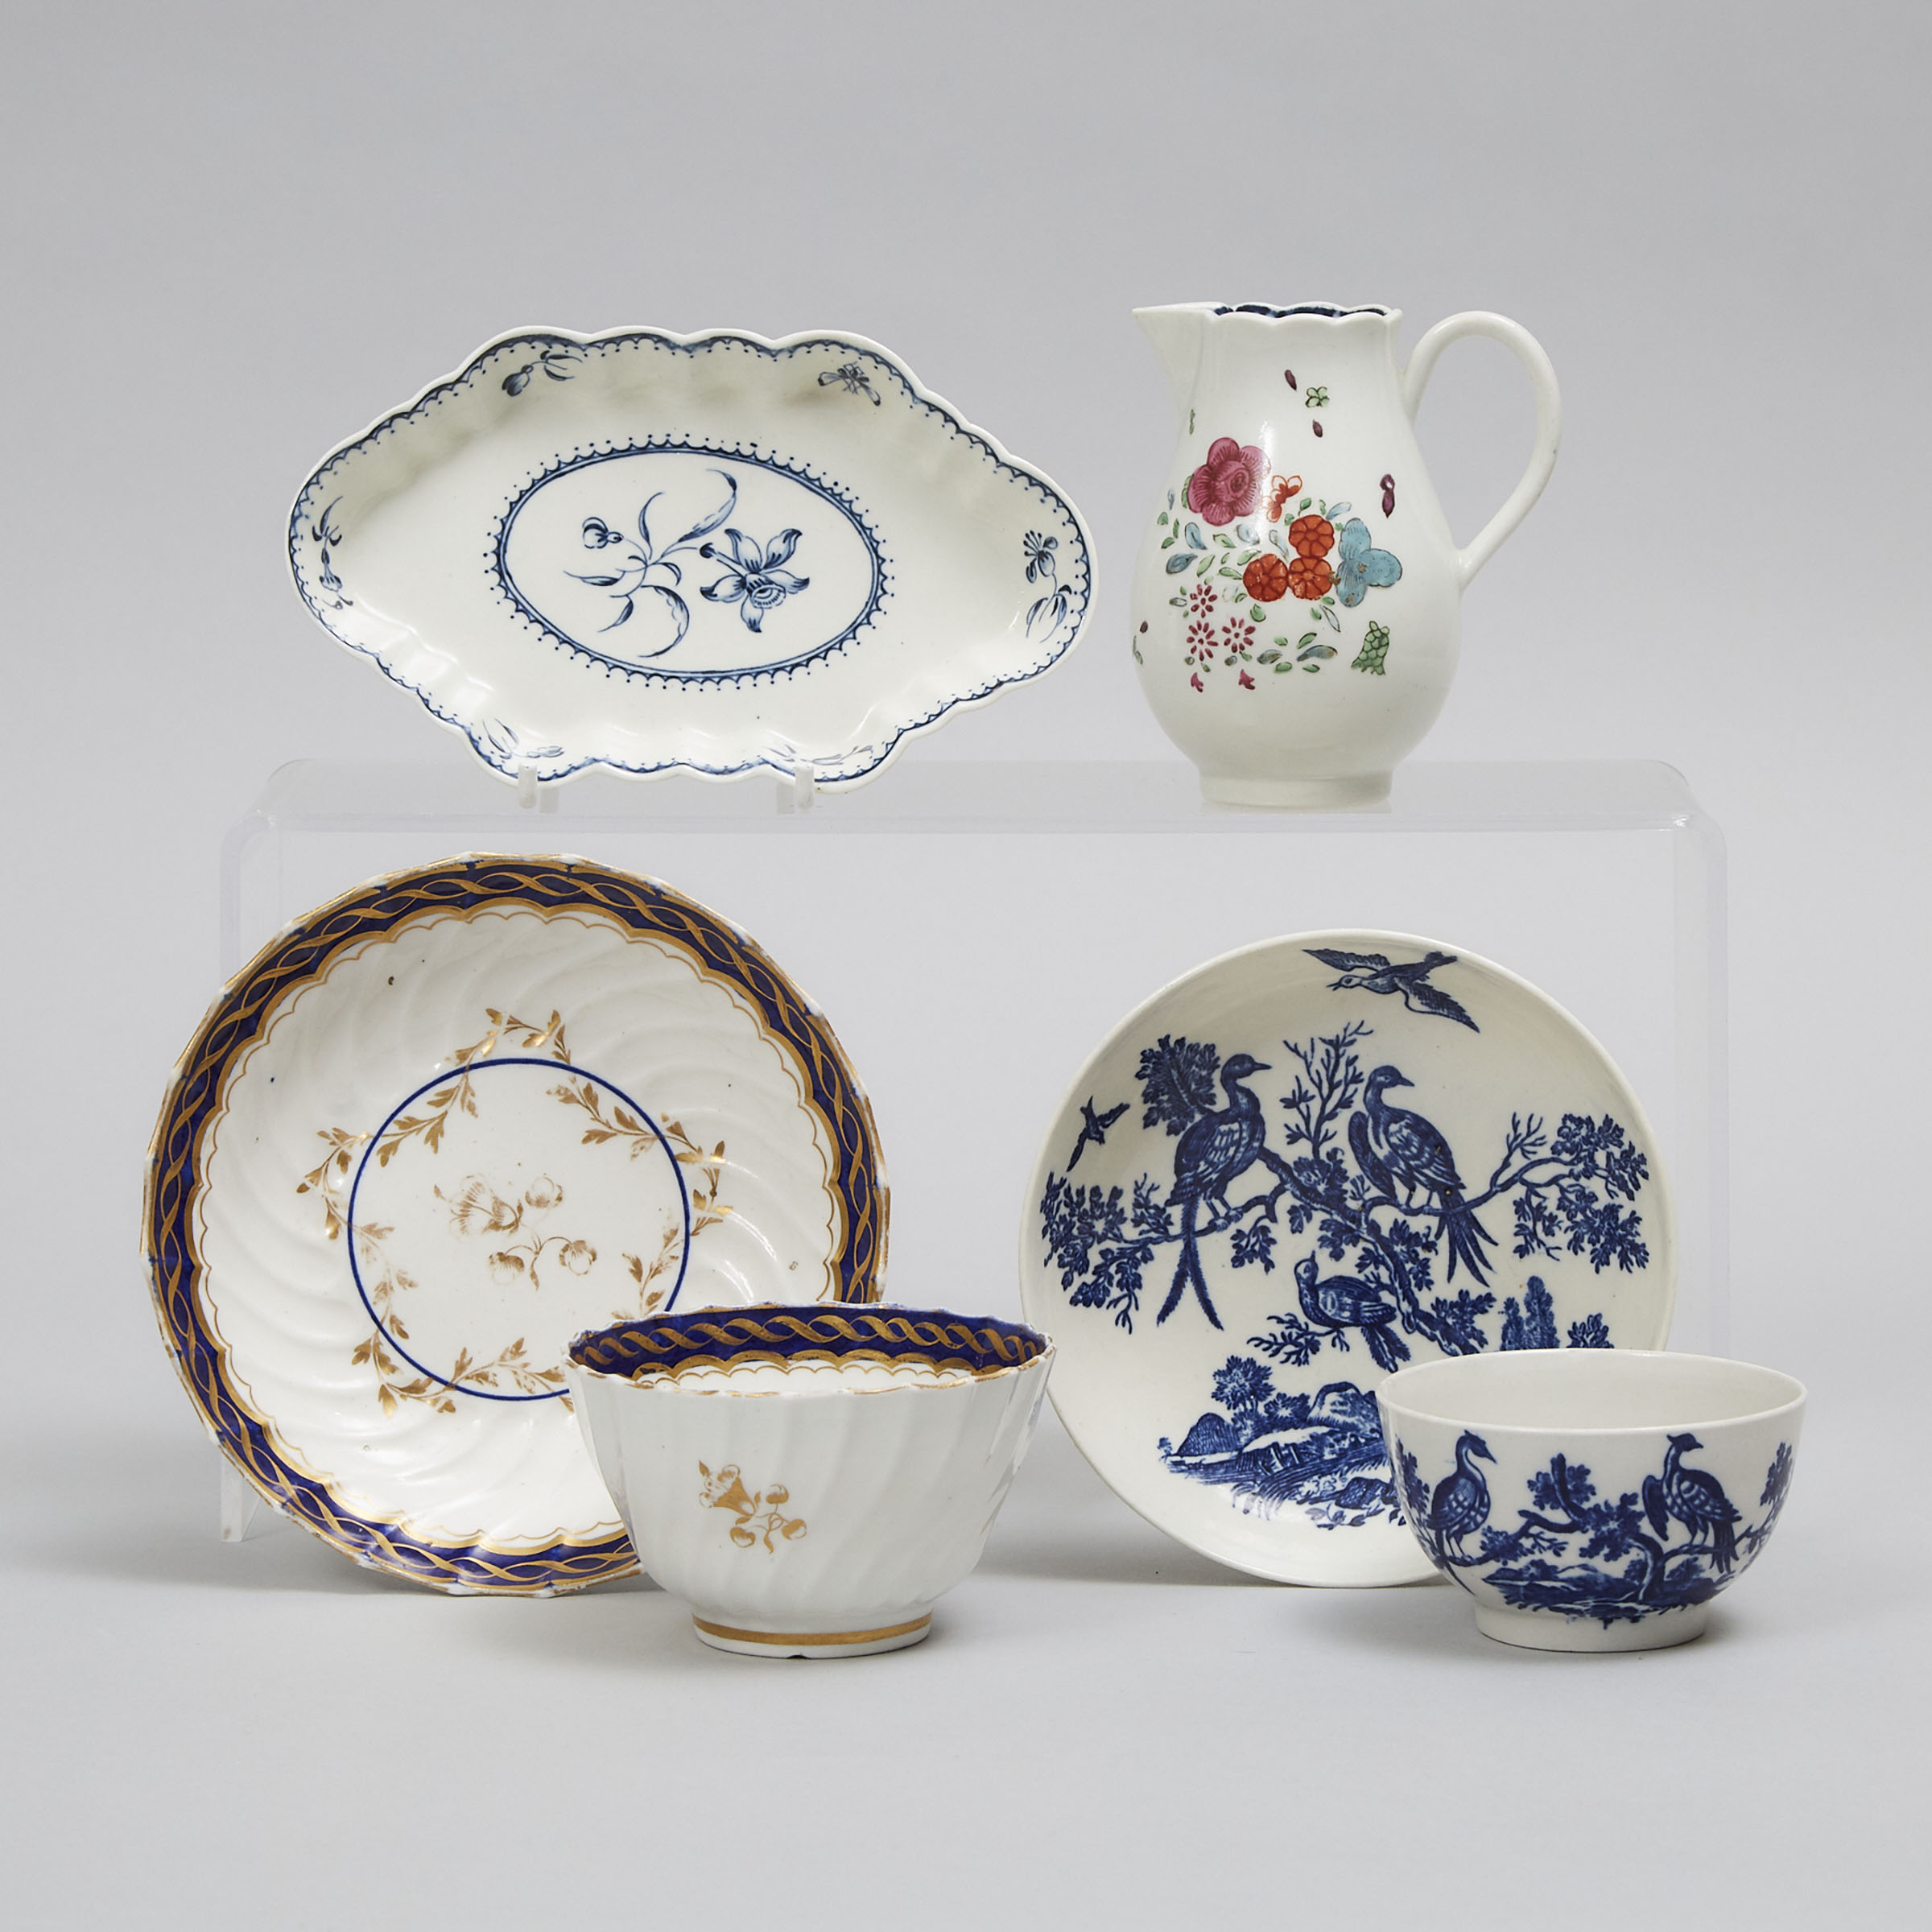 Group of Worcester Porcelain, late 18th century